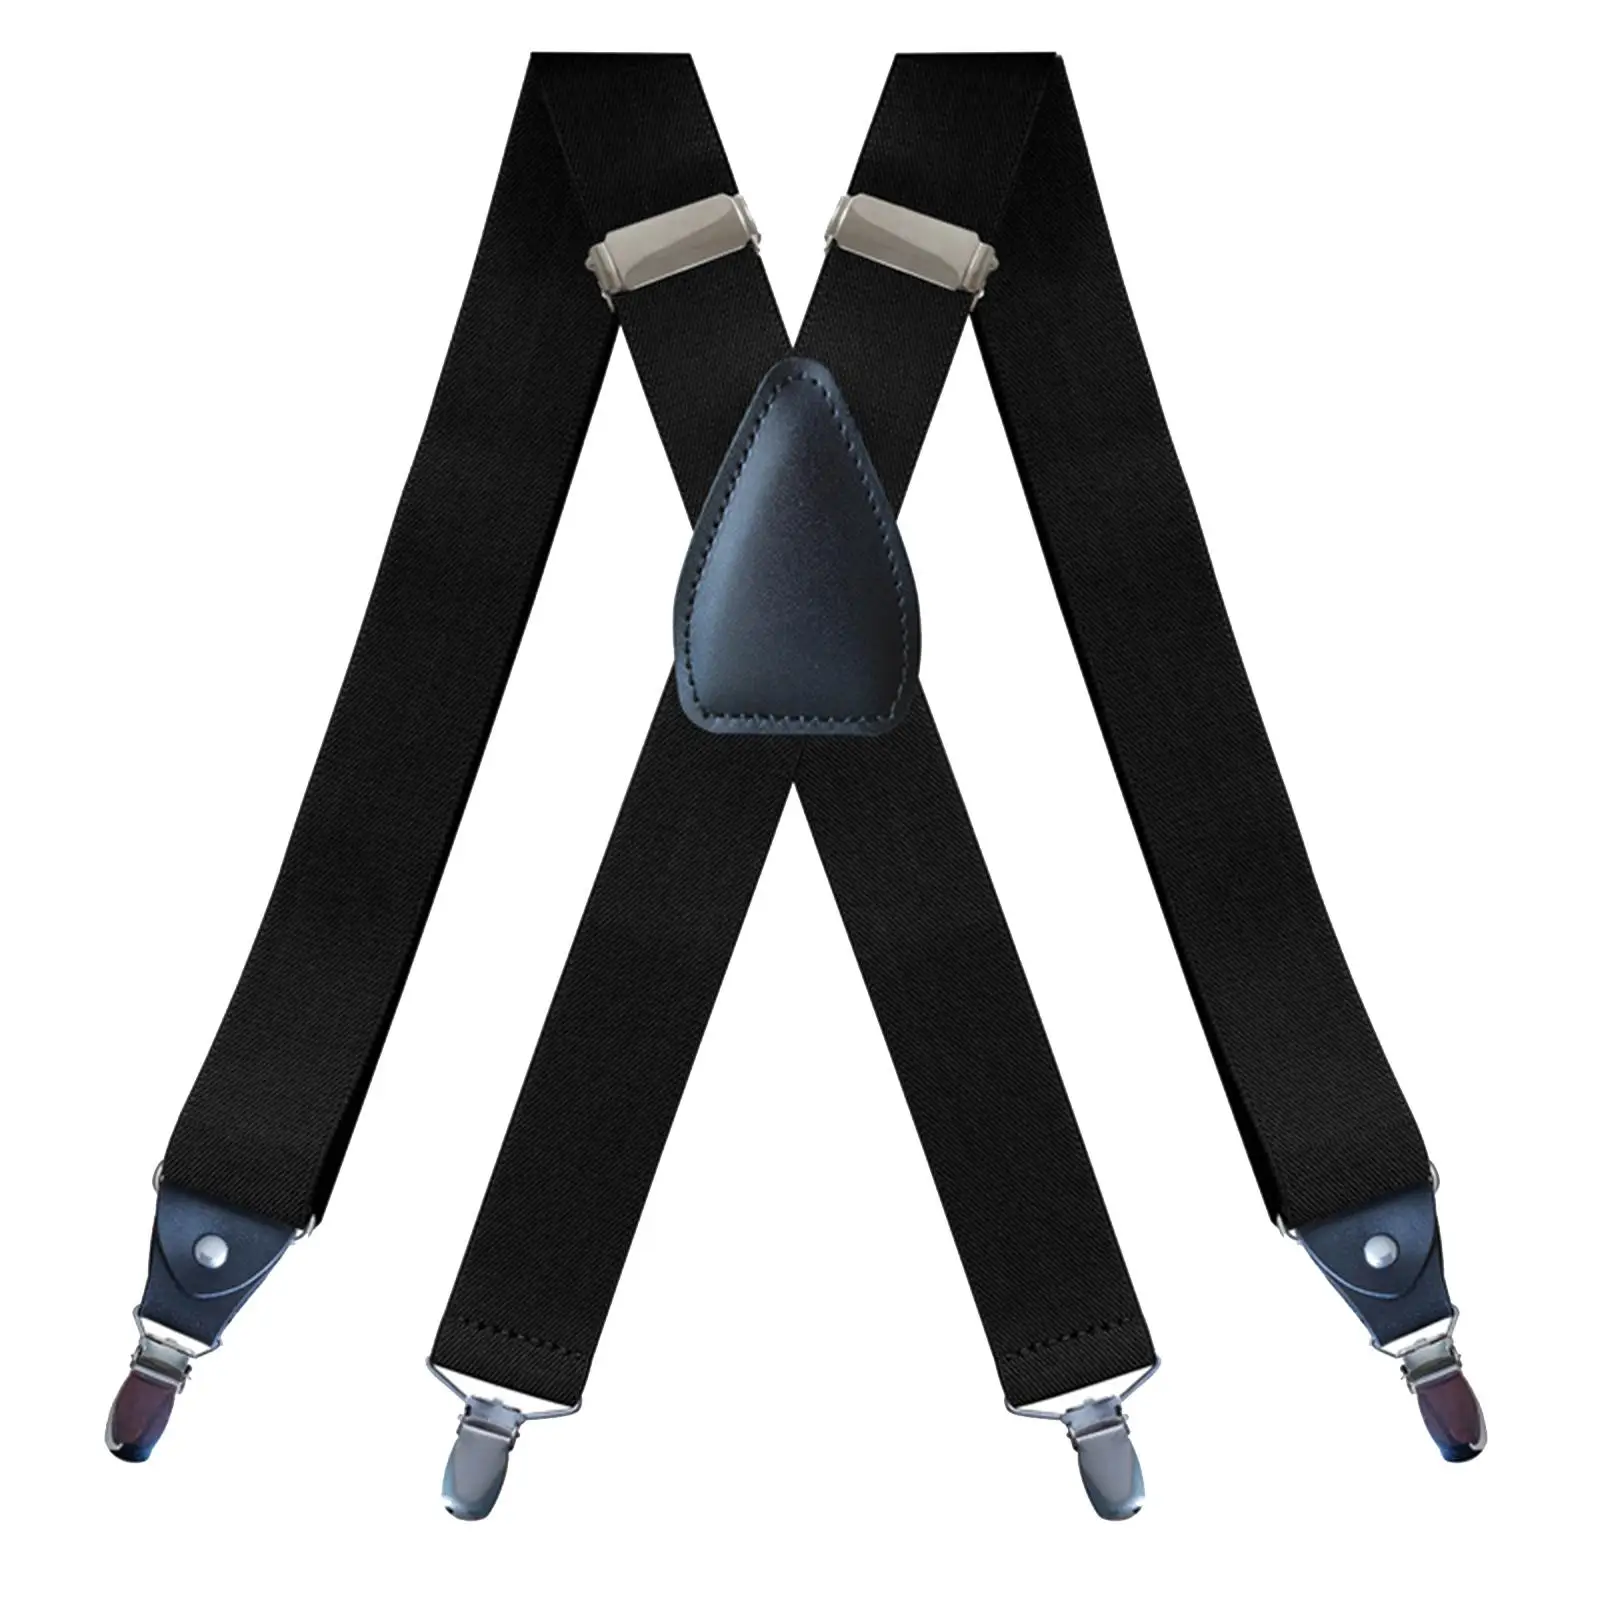 Suspenders for Men Size Fits All Strong Clips 1.38 Inches Brace Adult